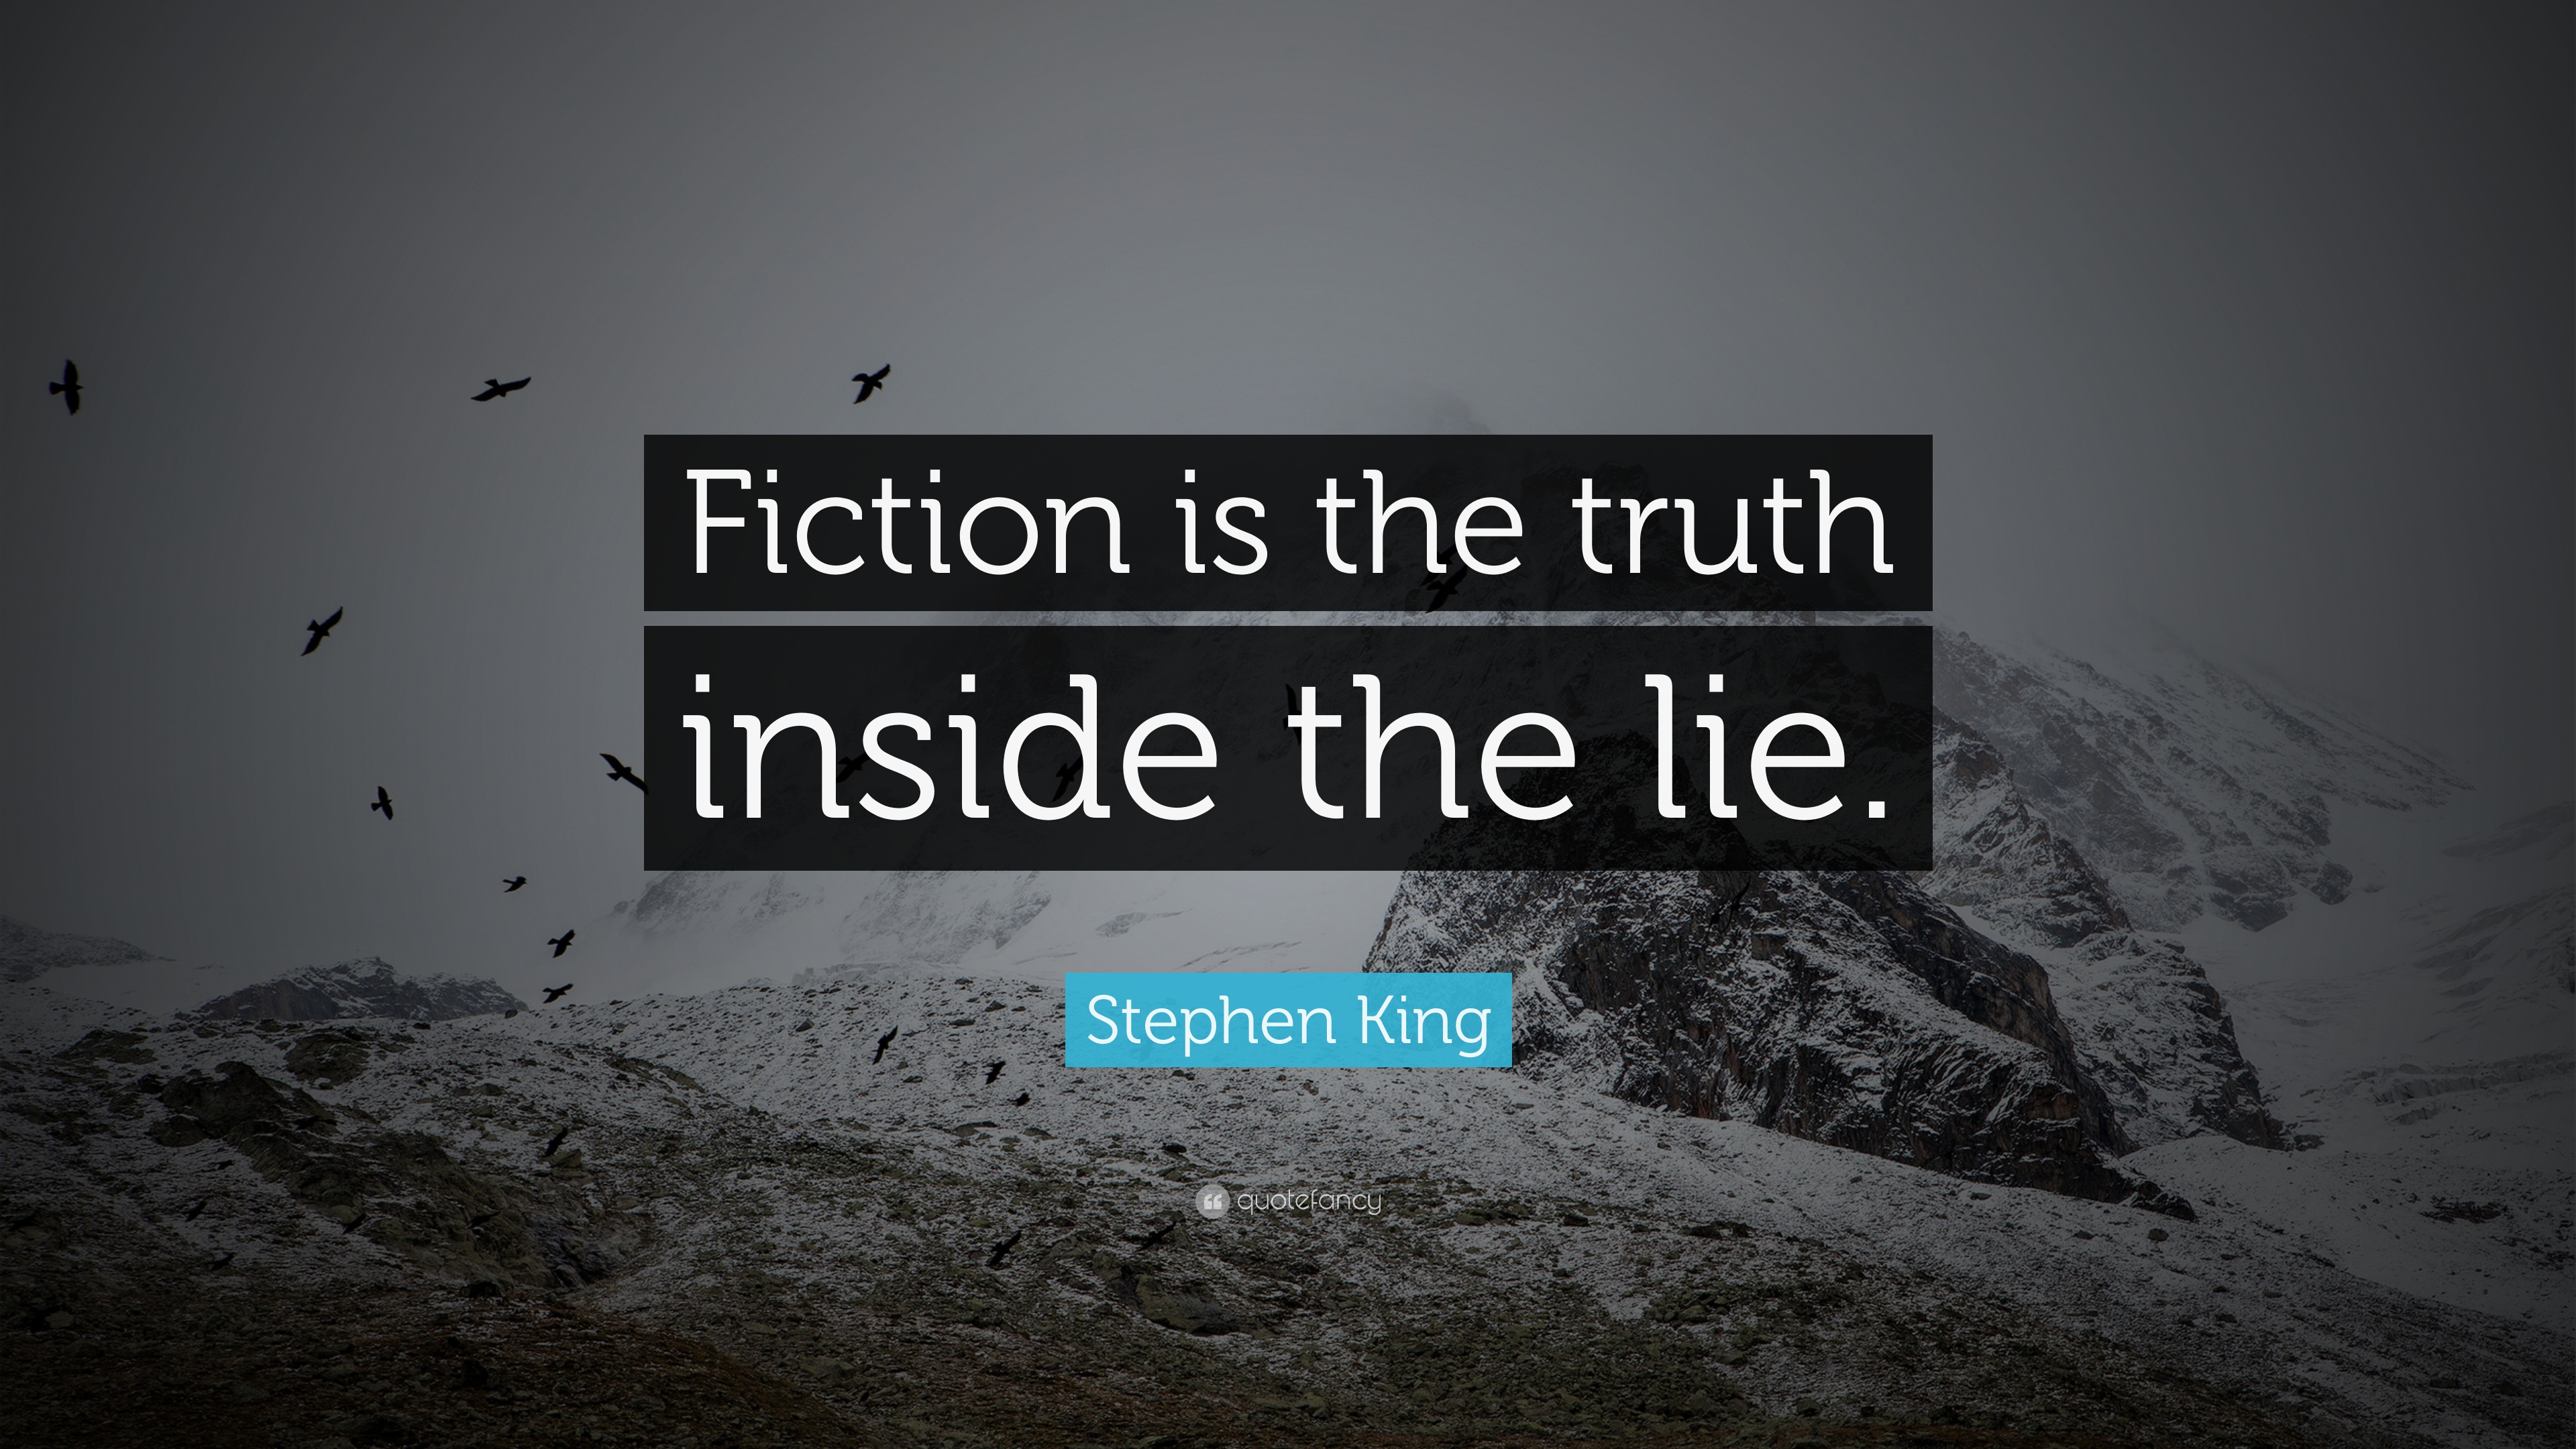 Stephen King Quote: “Fiction is the truth inside the lie.” 20